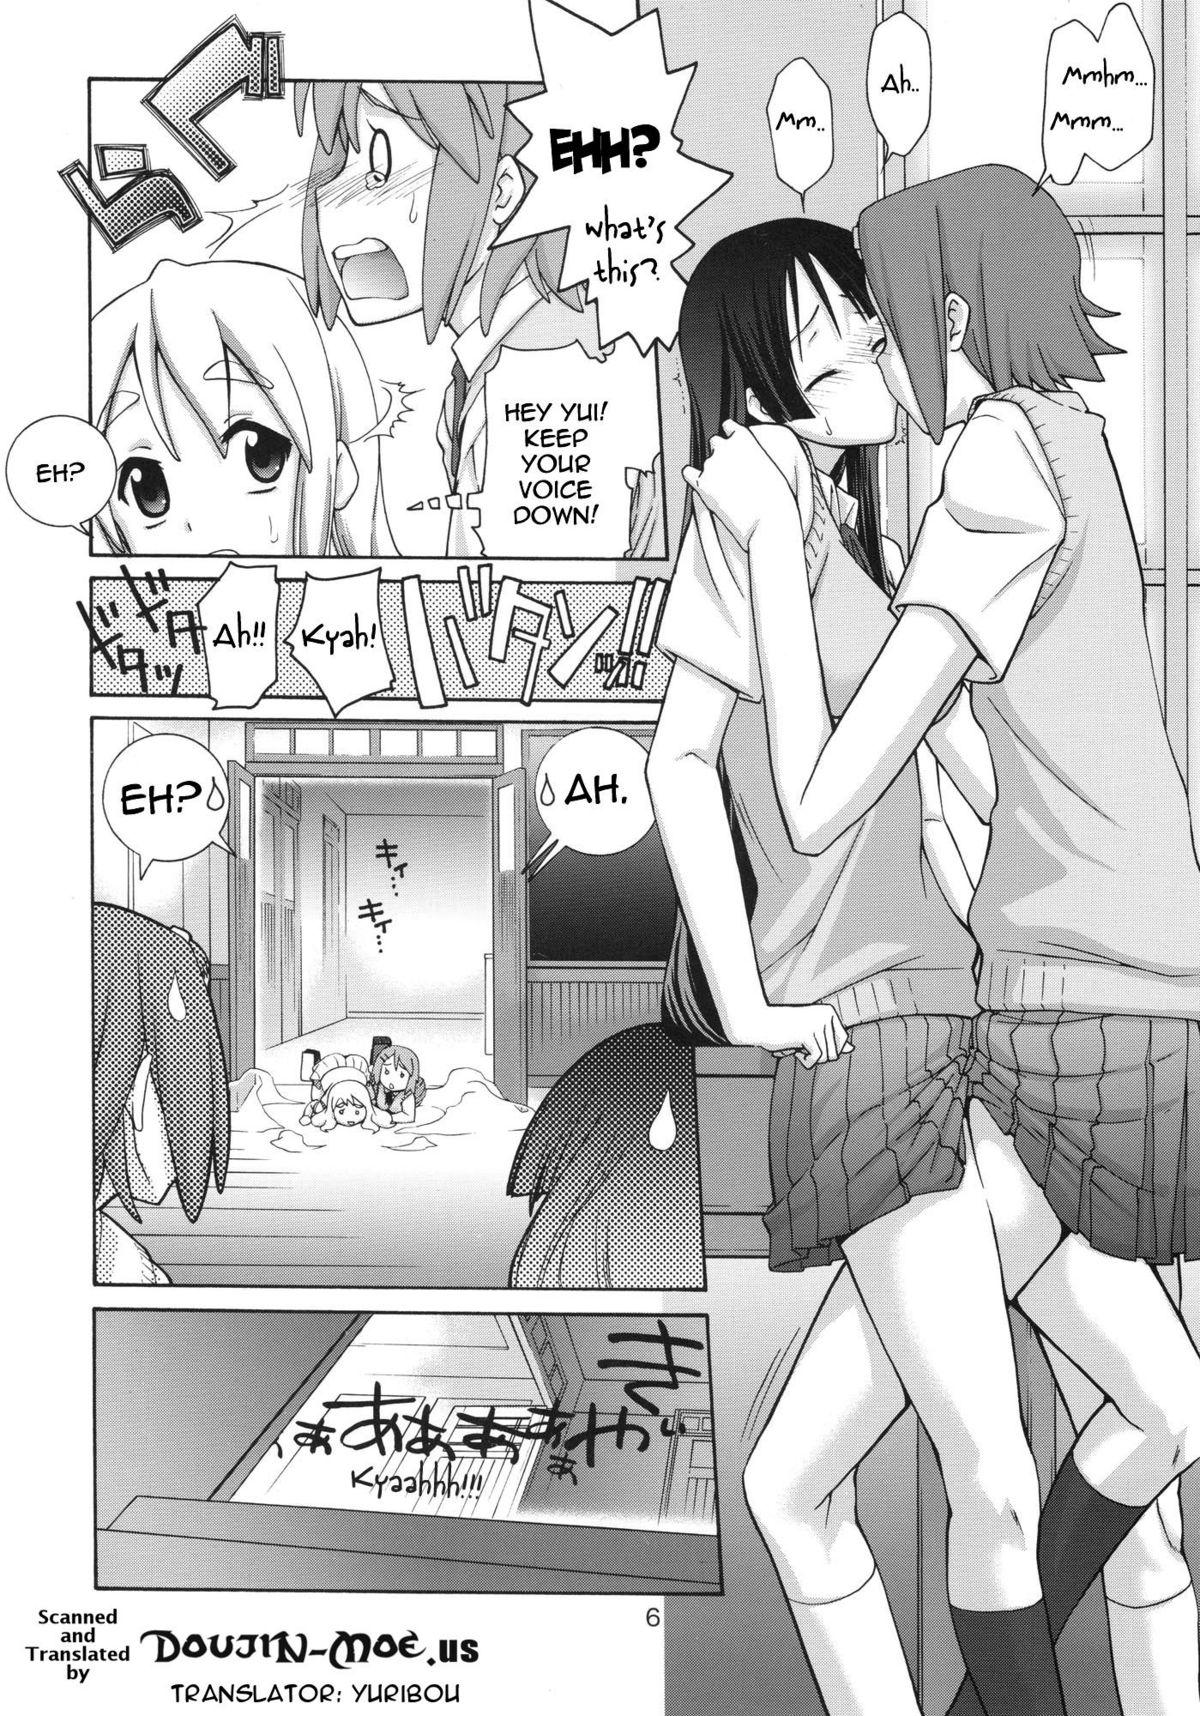 Prima Jumping Now!! - K-on Exibicionismo - Page 5